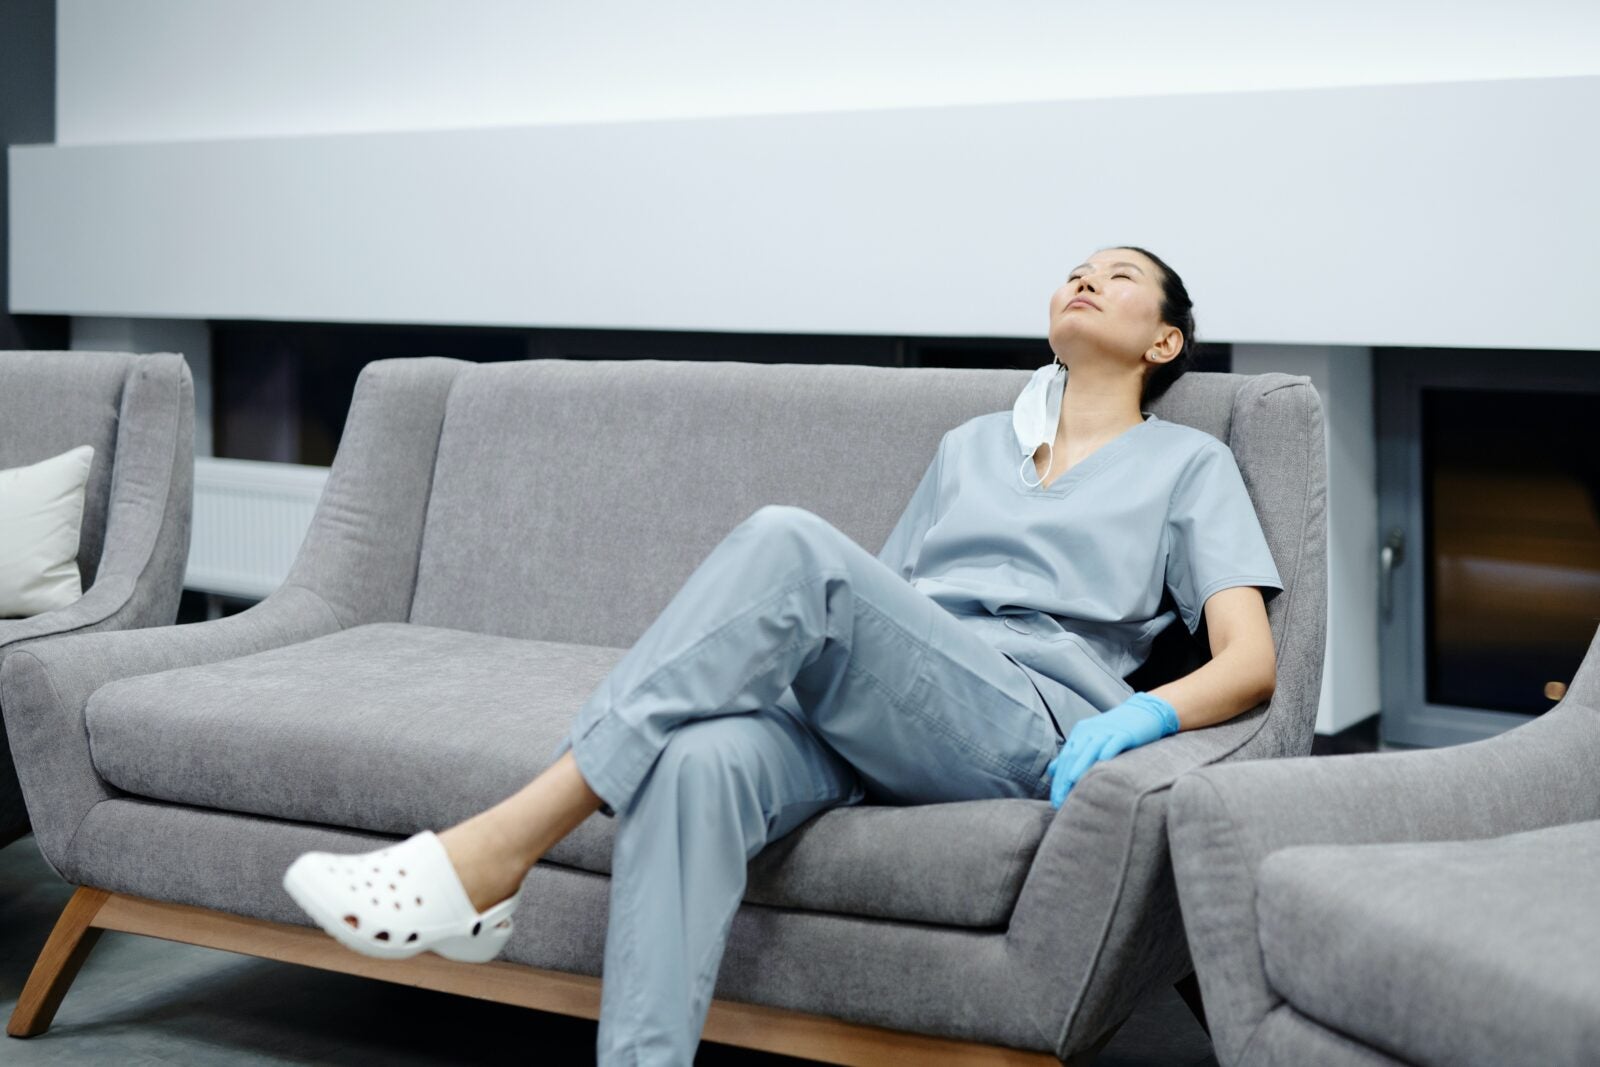 A young Asian woman wearing hospital scrubs, white crocs and blue gloves sit on a 2 seater sofa while resting her head and crossing her legs.